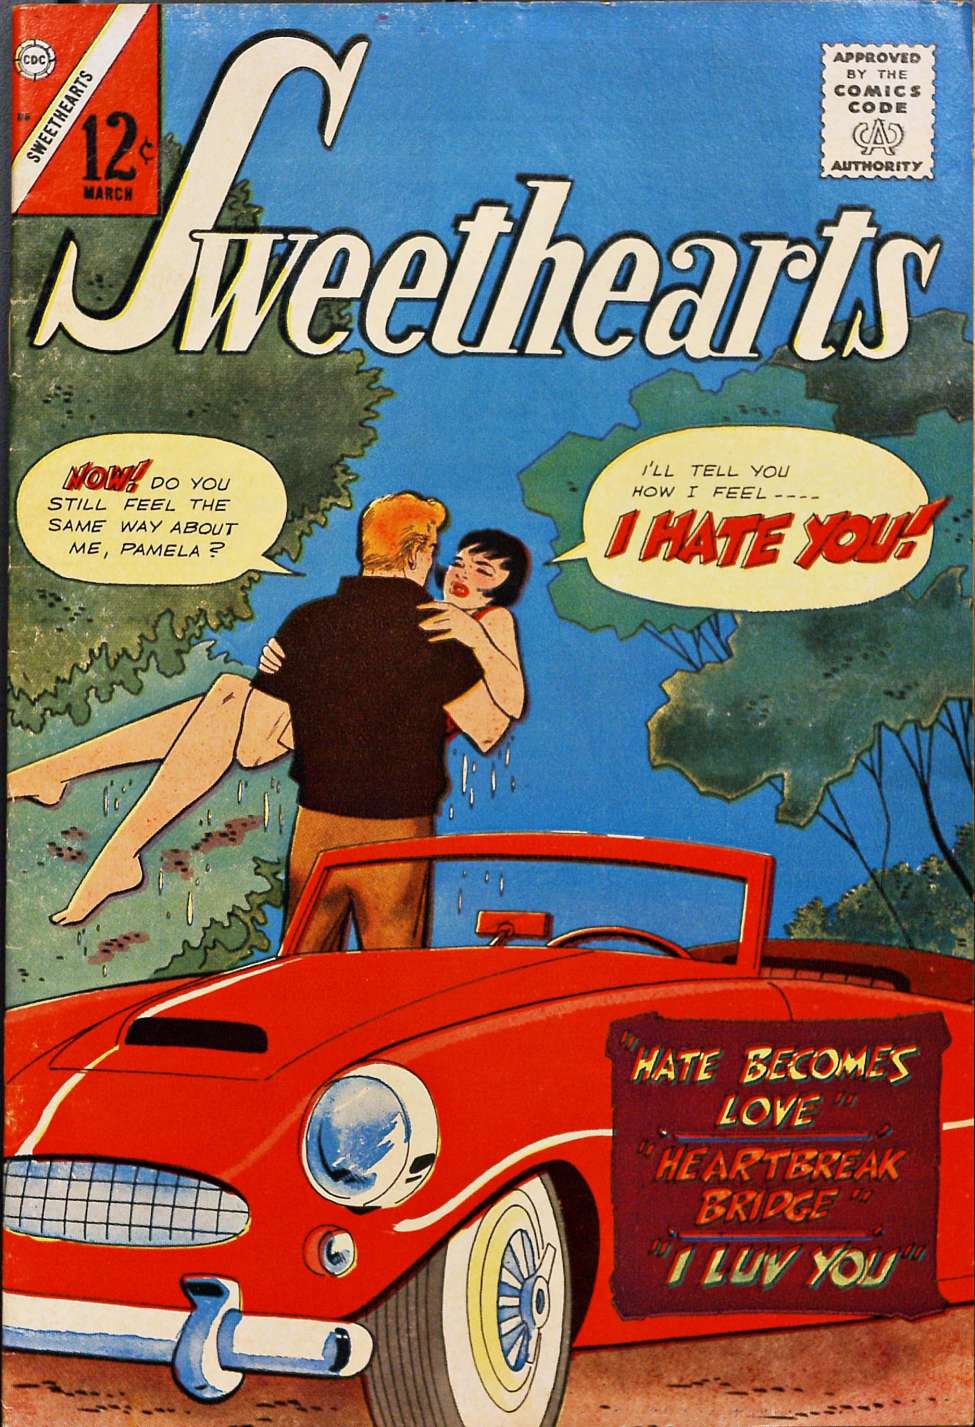 Book Cover For Sweethearts 86